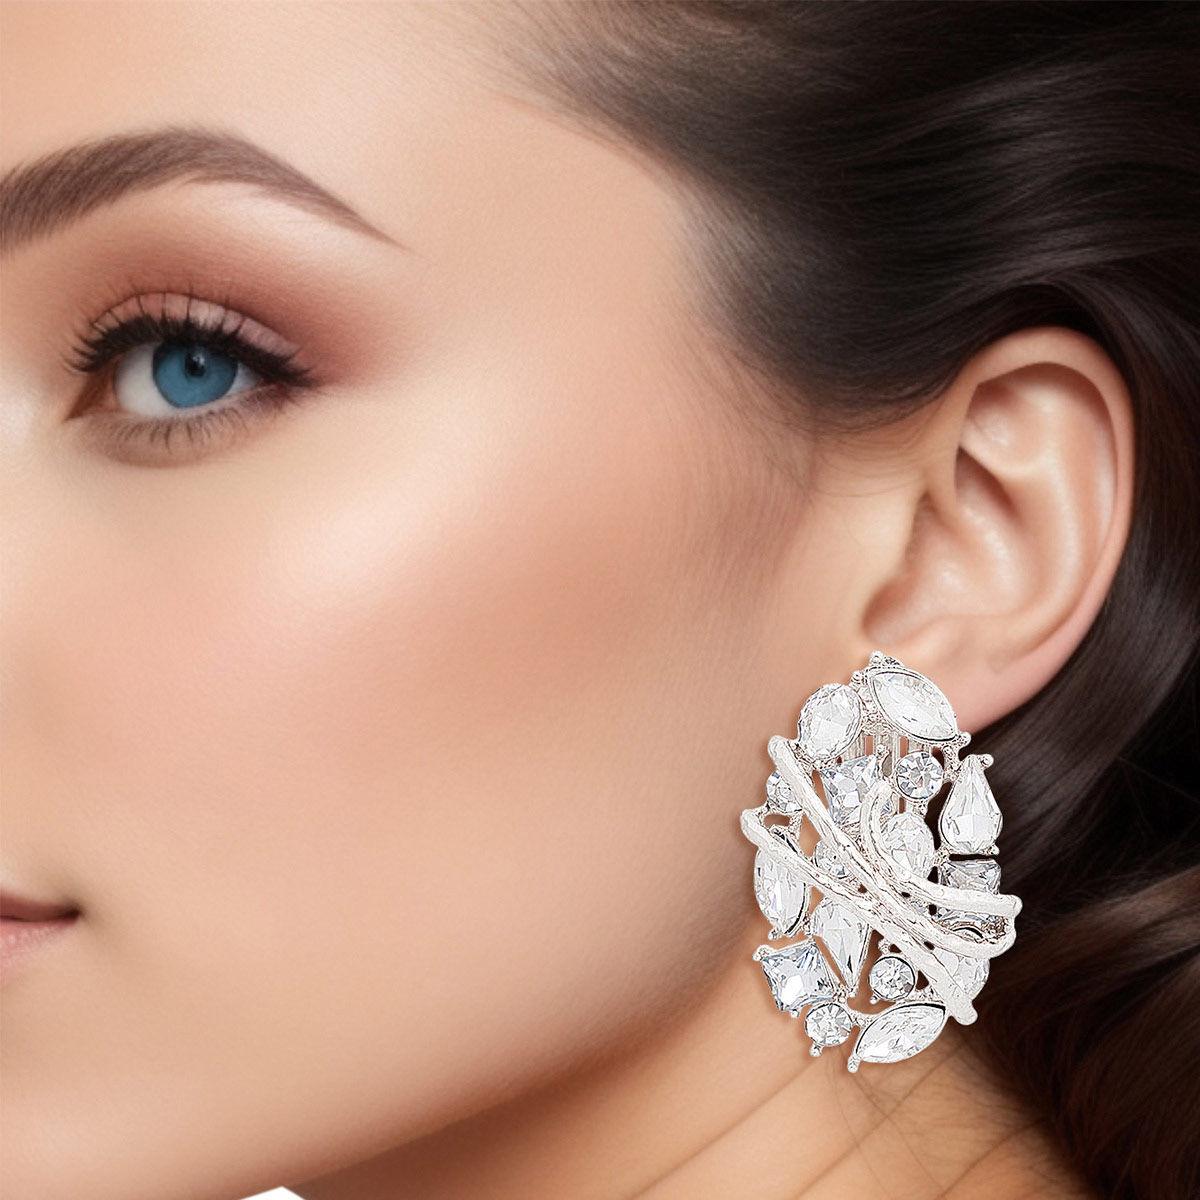 Get the Look: Clear Rhodium Oval Clip Earrings for Retro Vibes